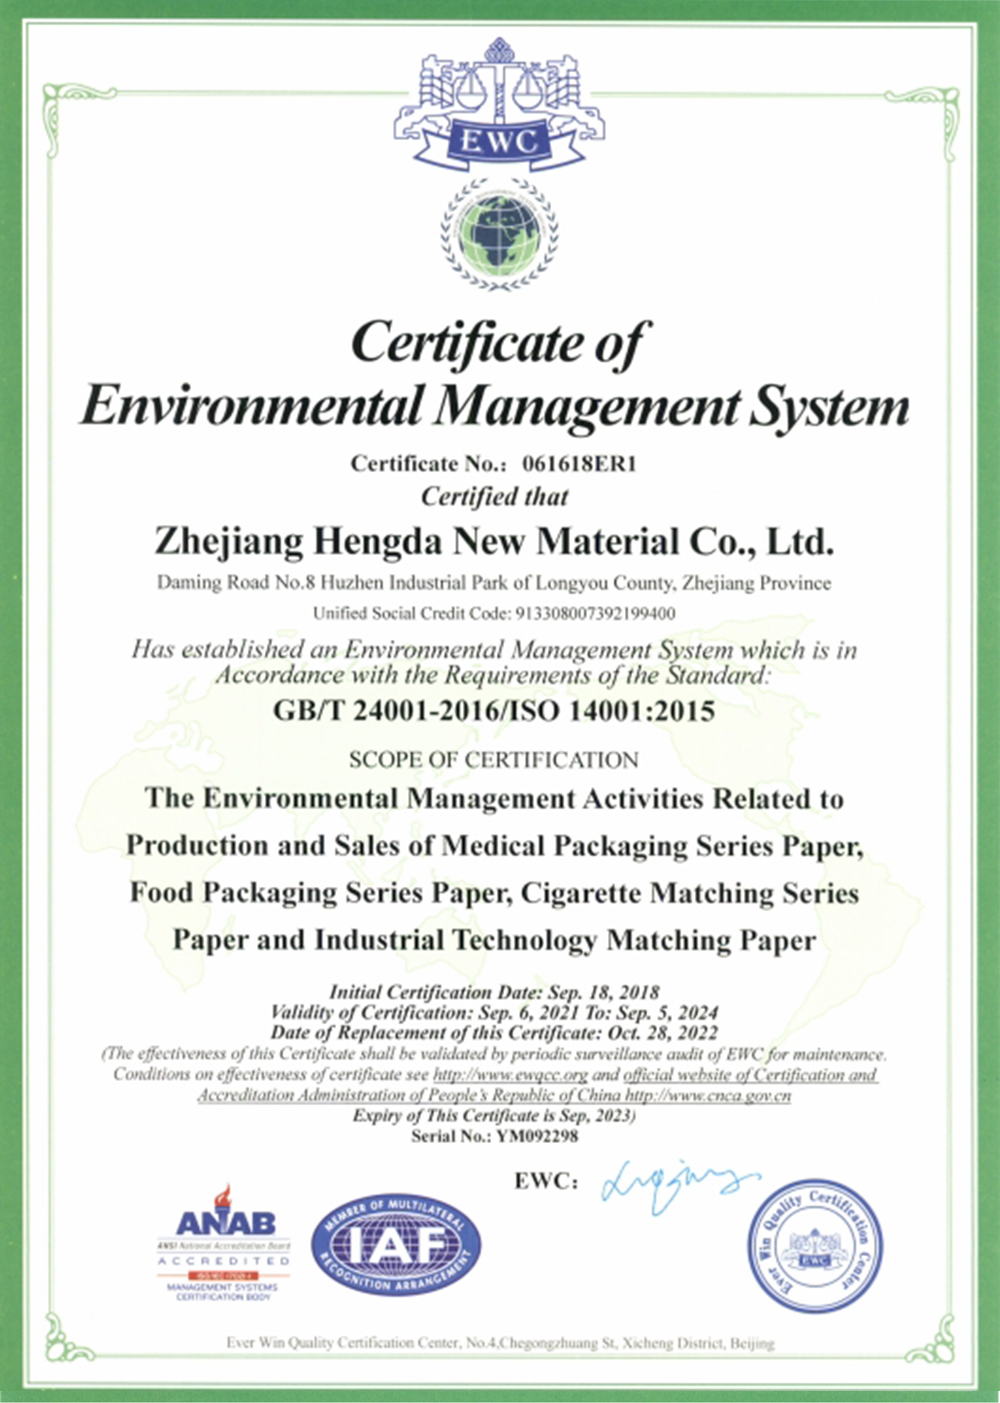  Certificate of Environment Management System